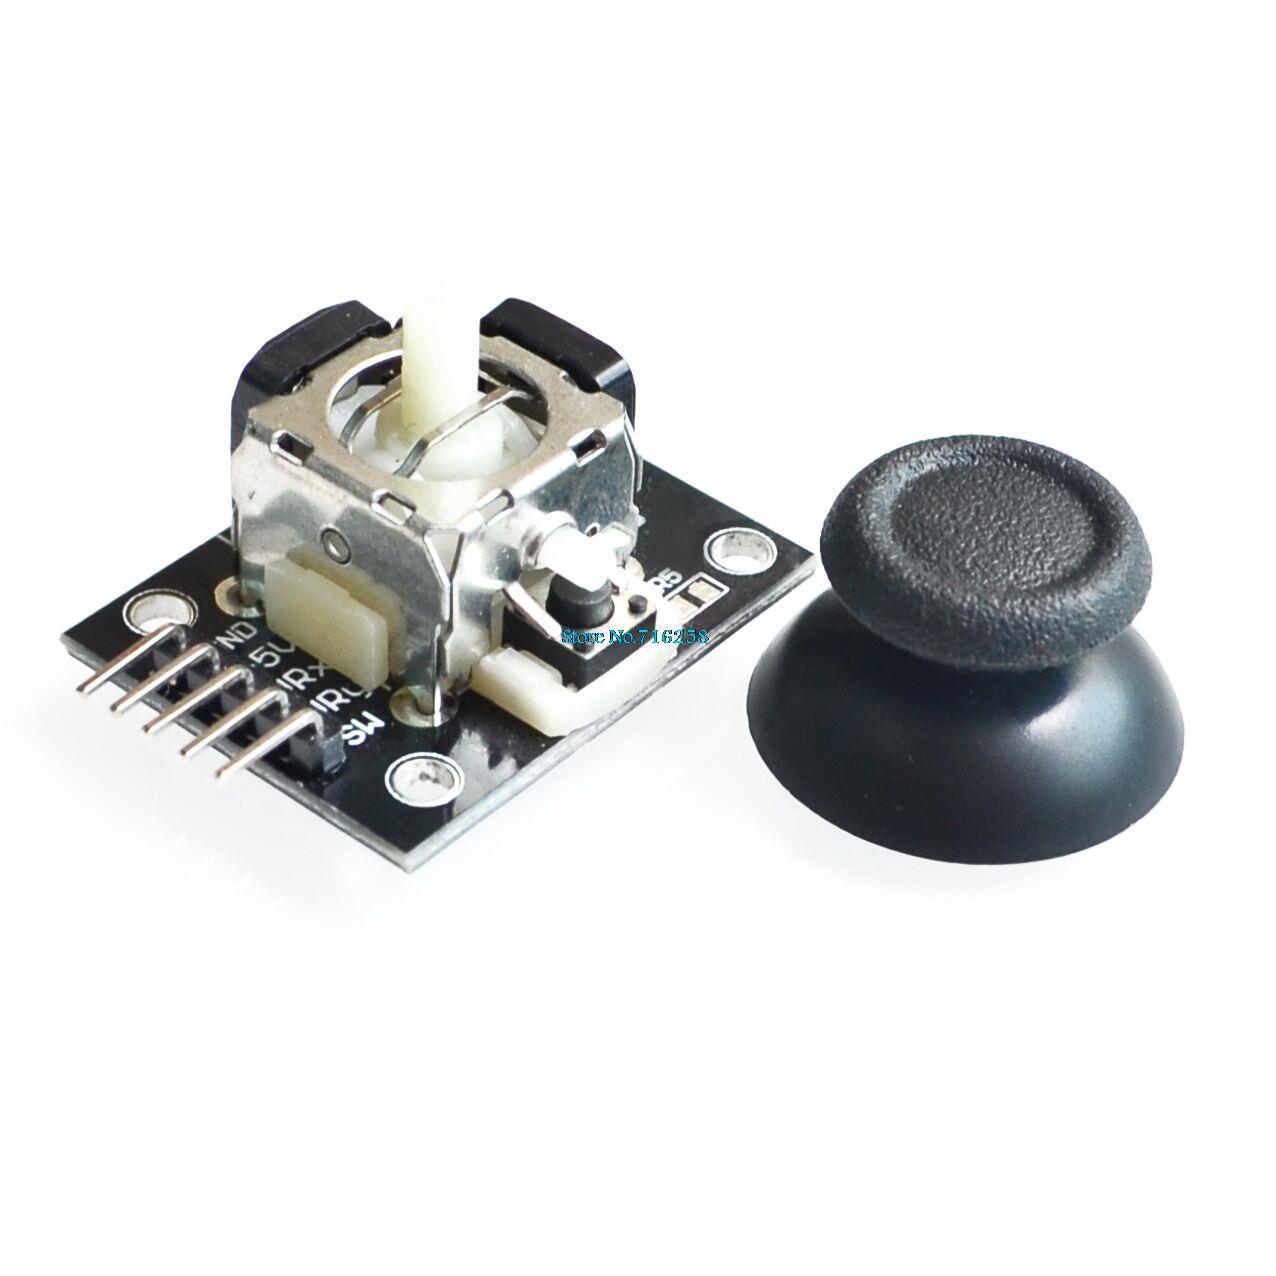 For-Arduino-Dual-axis-XY-Joystick-Module-Higher-Quality-PS2-Joystick-Control-Lever-Sensor-KY-023-Rated-4-9-5